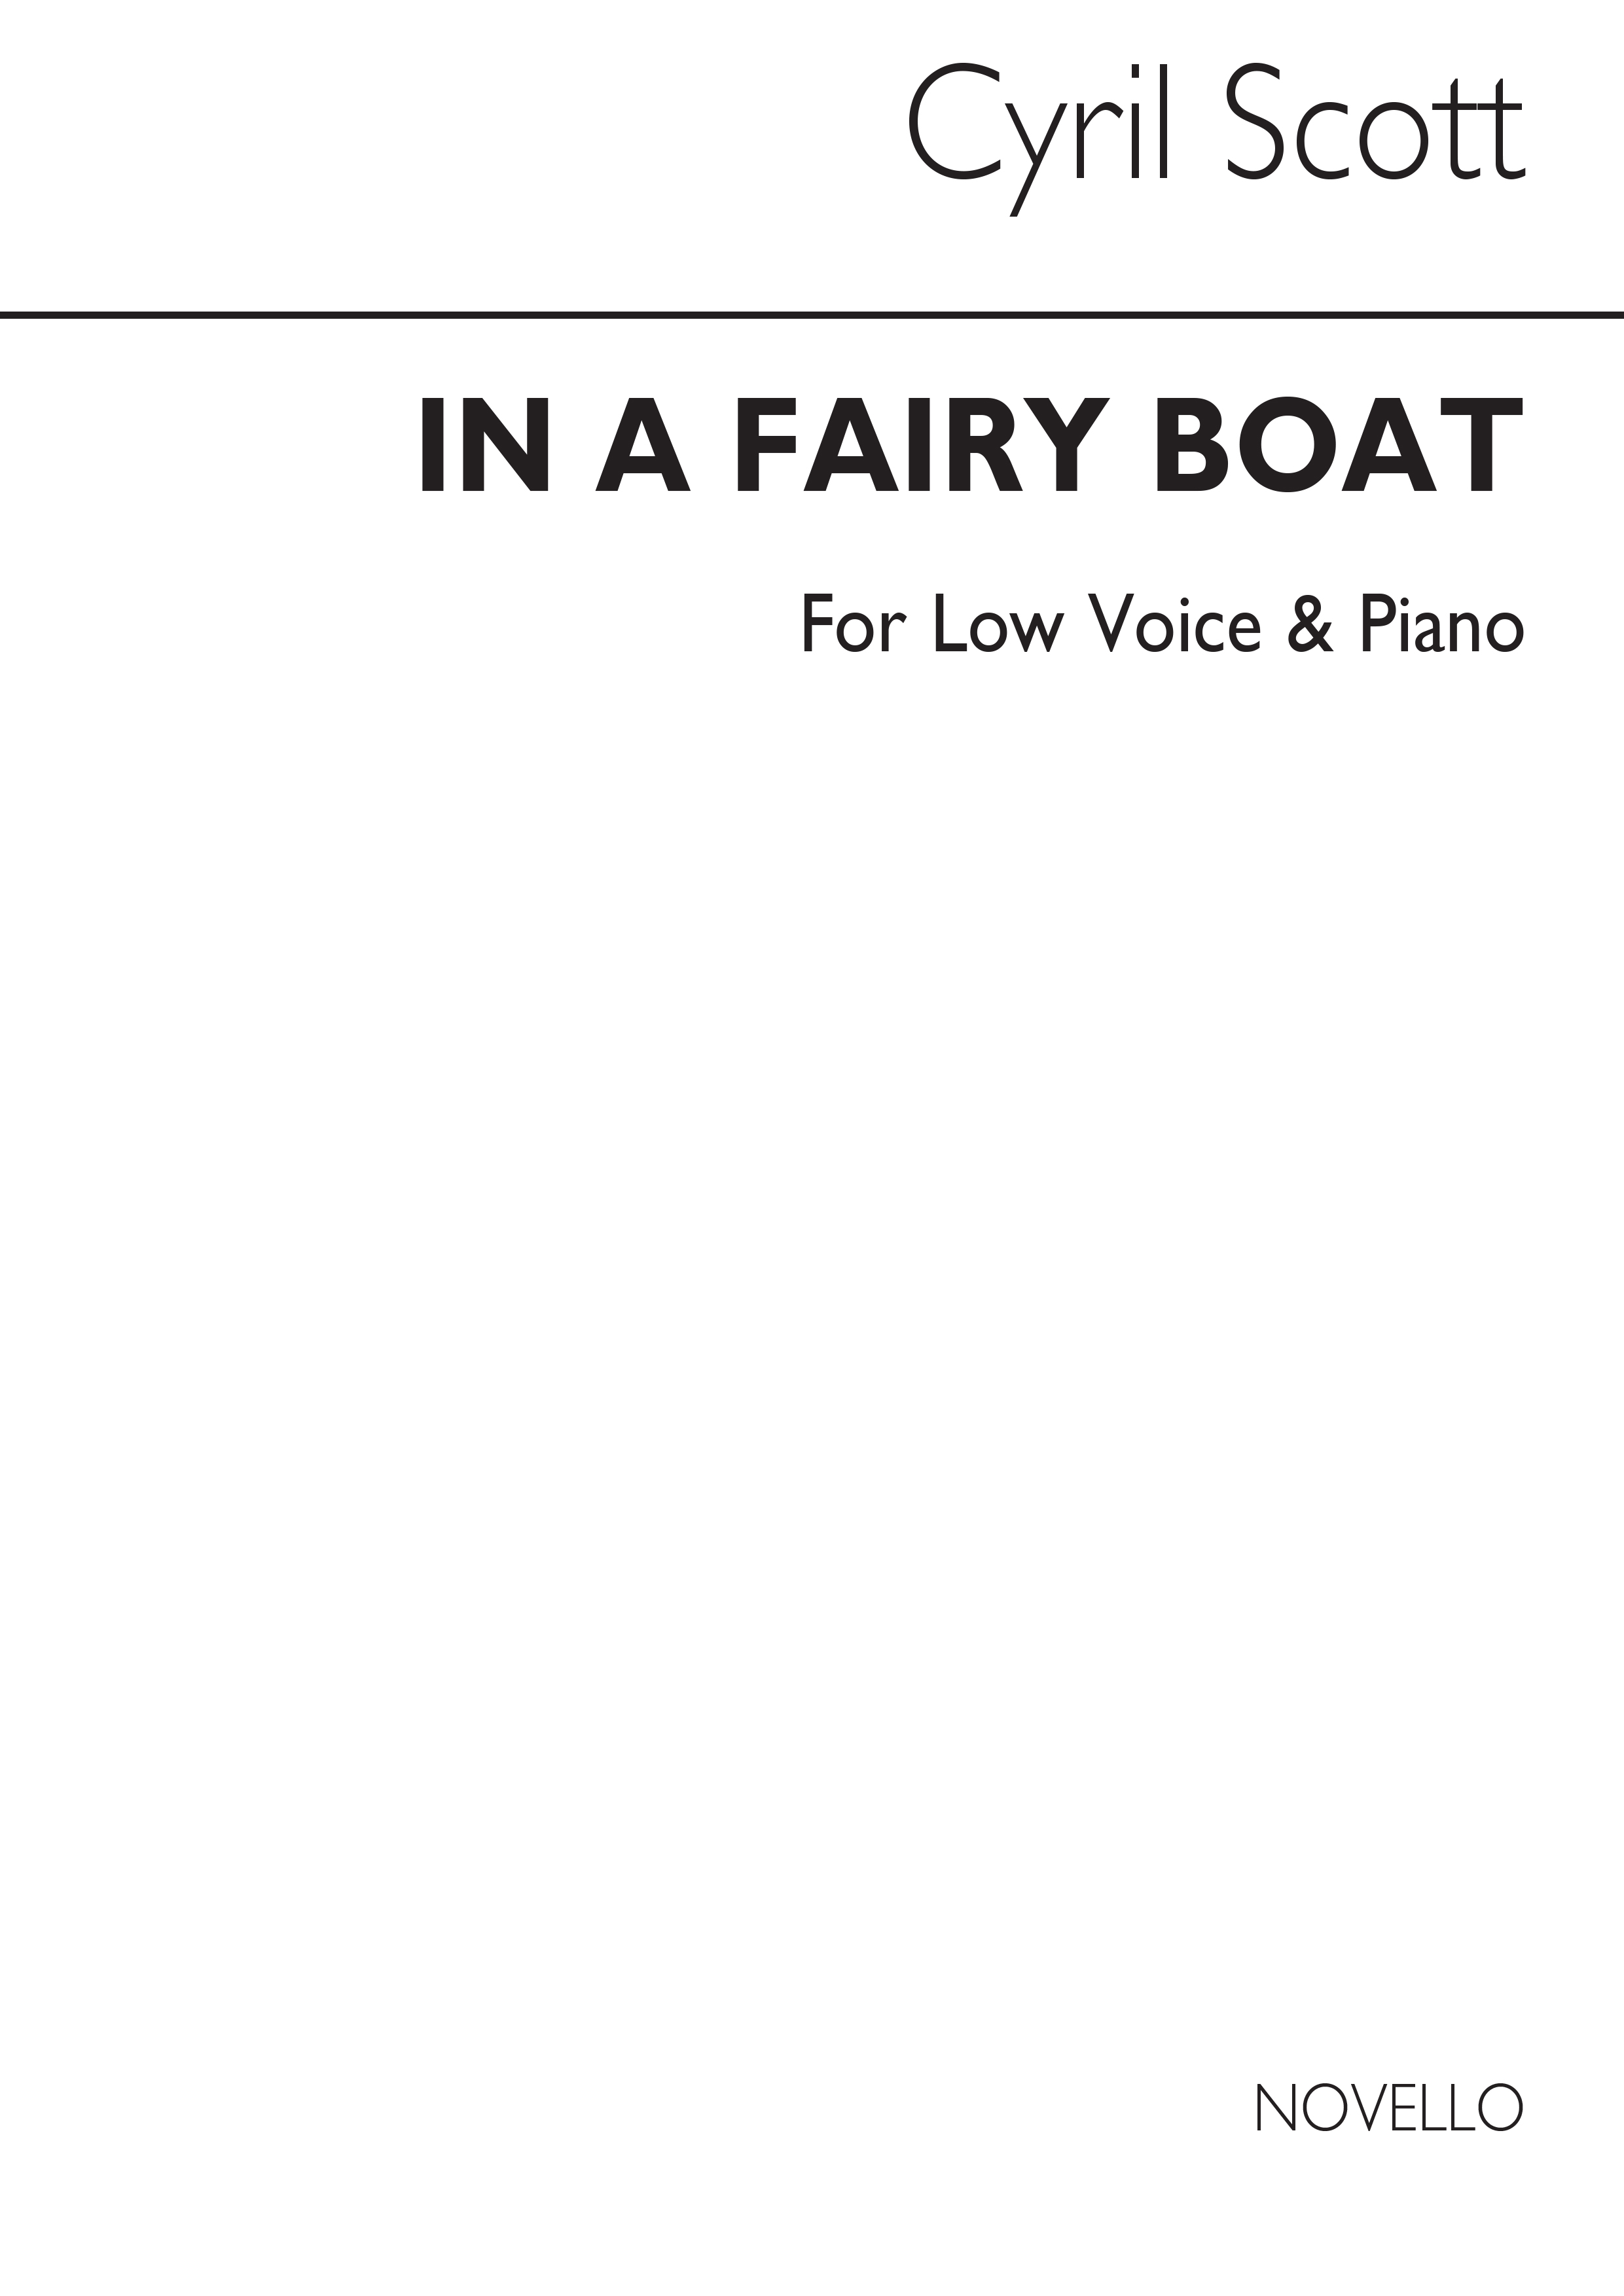 Cyril Scott: In A Fairy Boat Op61 No.2-low Voice/Piano (Key-c)